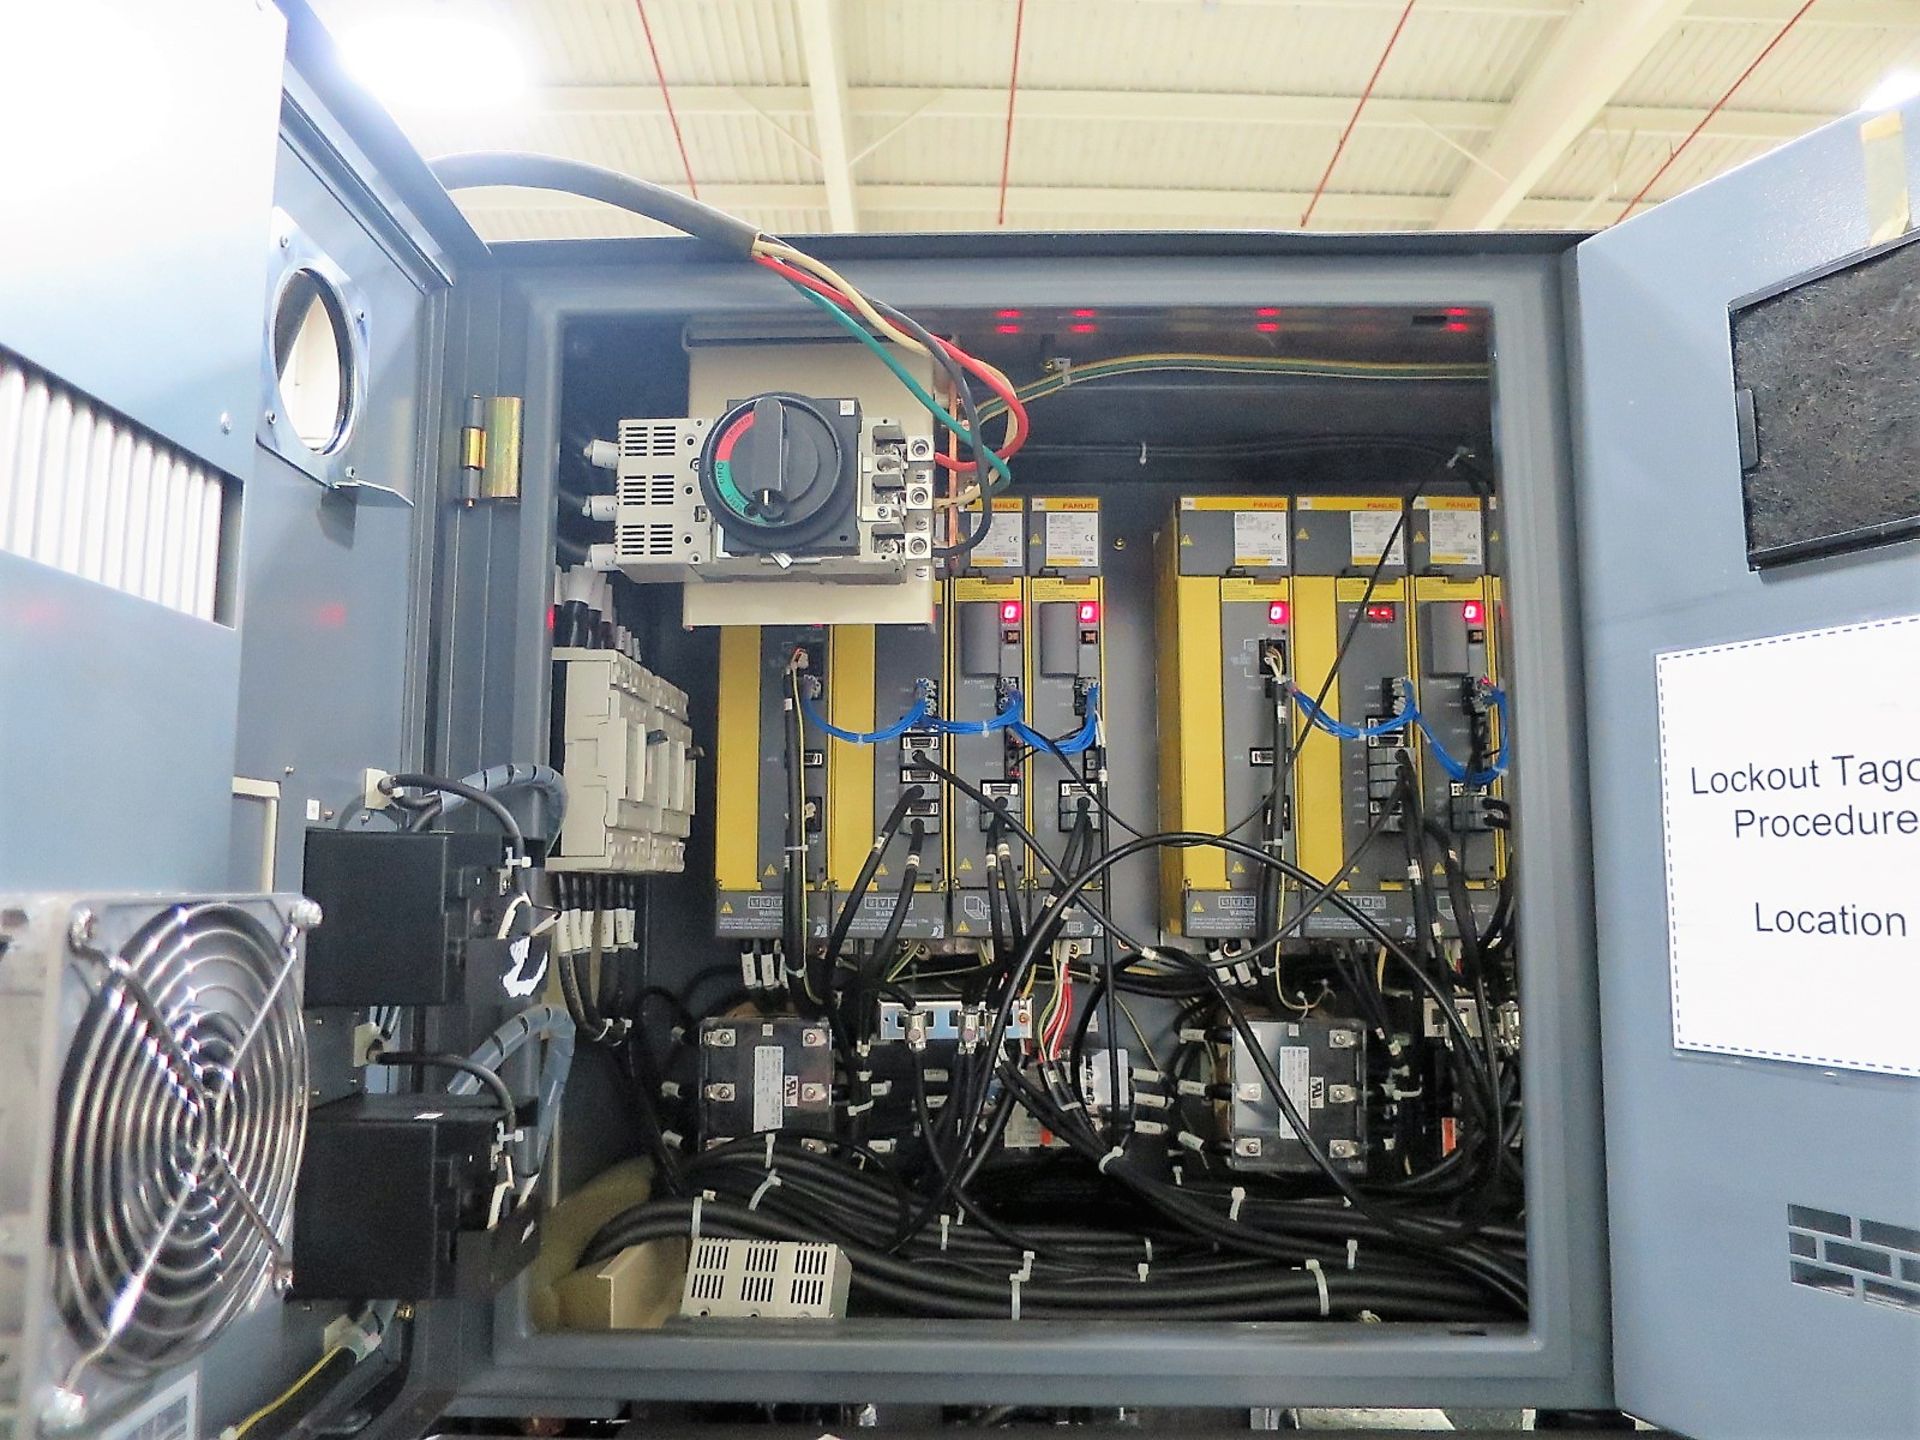 Okuma 2SP-150HM Twin Spindle 3-Axis Turning Center w/Live Milling, S/N 2SP-150HM, New 2011 - Image 10 of 12